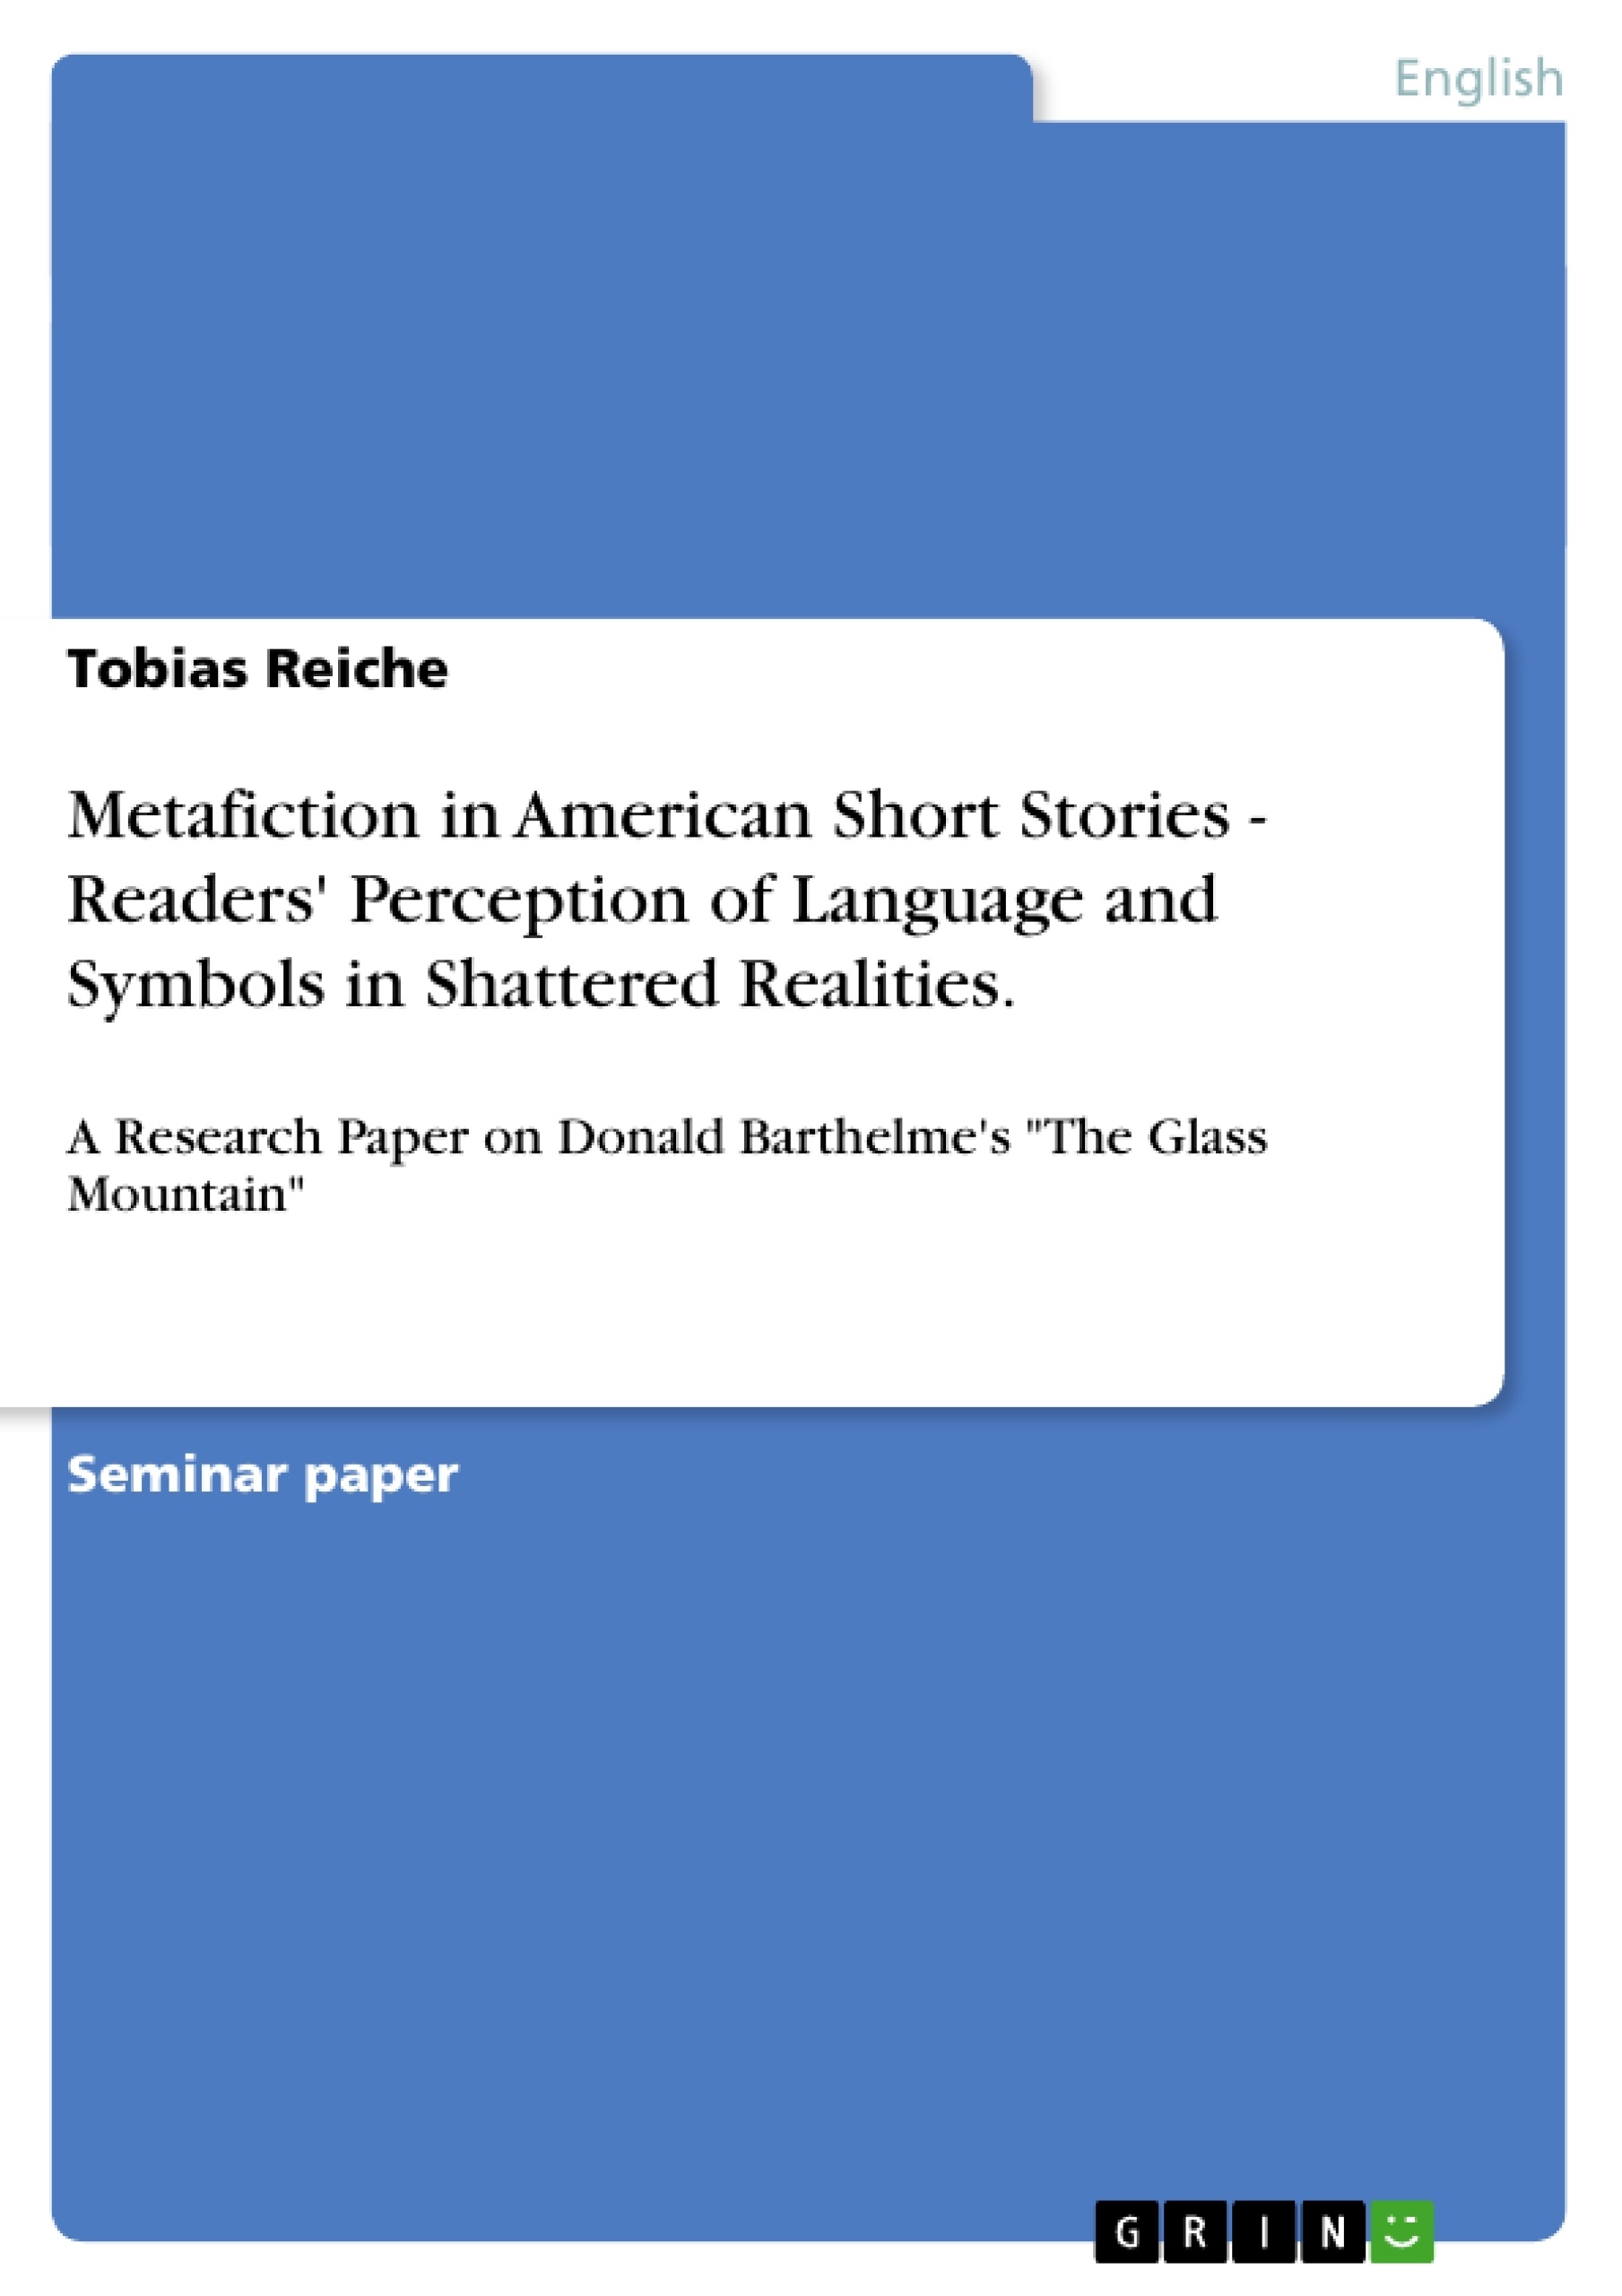 Titel: Metafiction in American Short Stories - Readers' Perception of Language and Symbols in Shattered Realities.